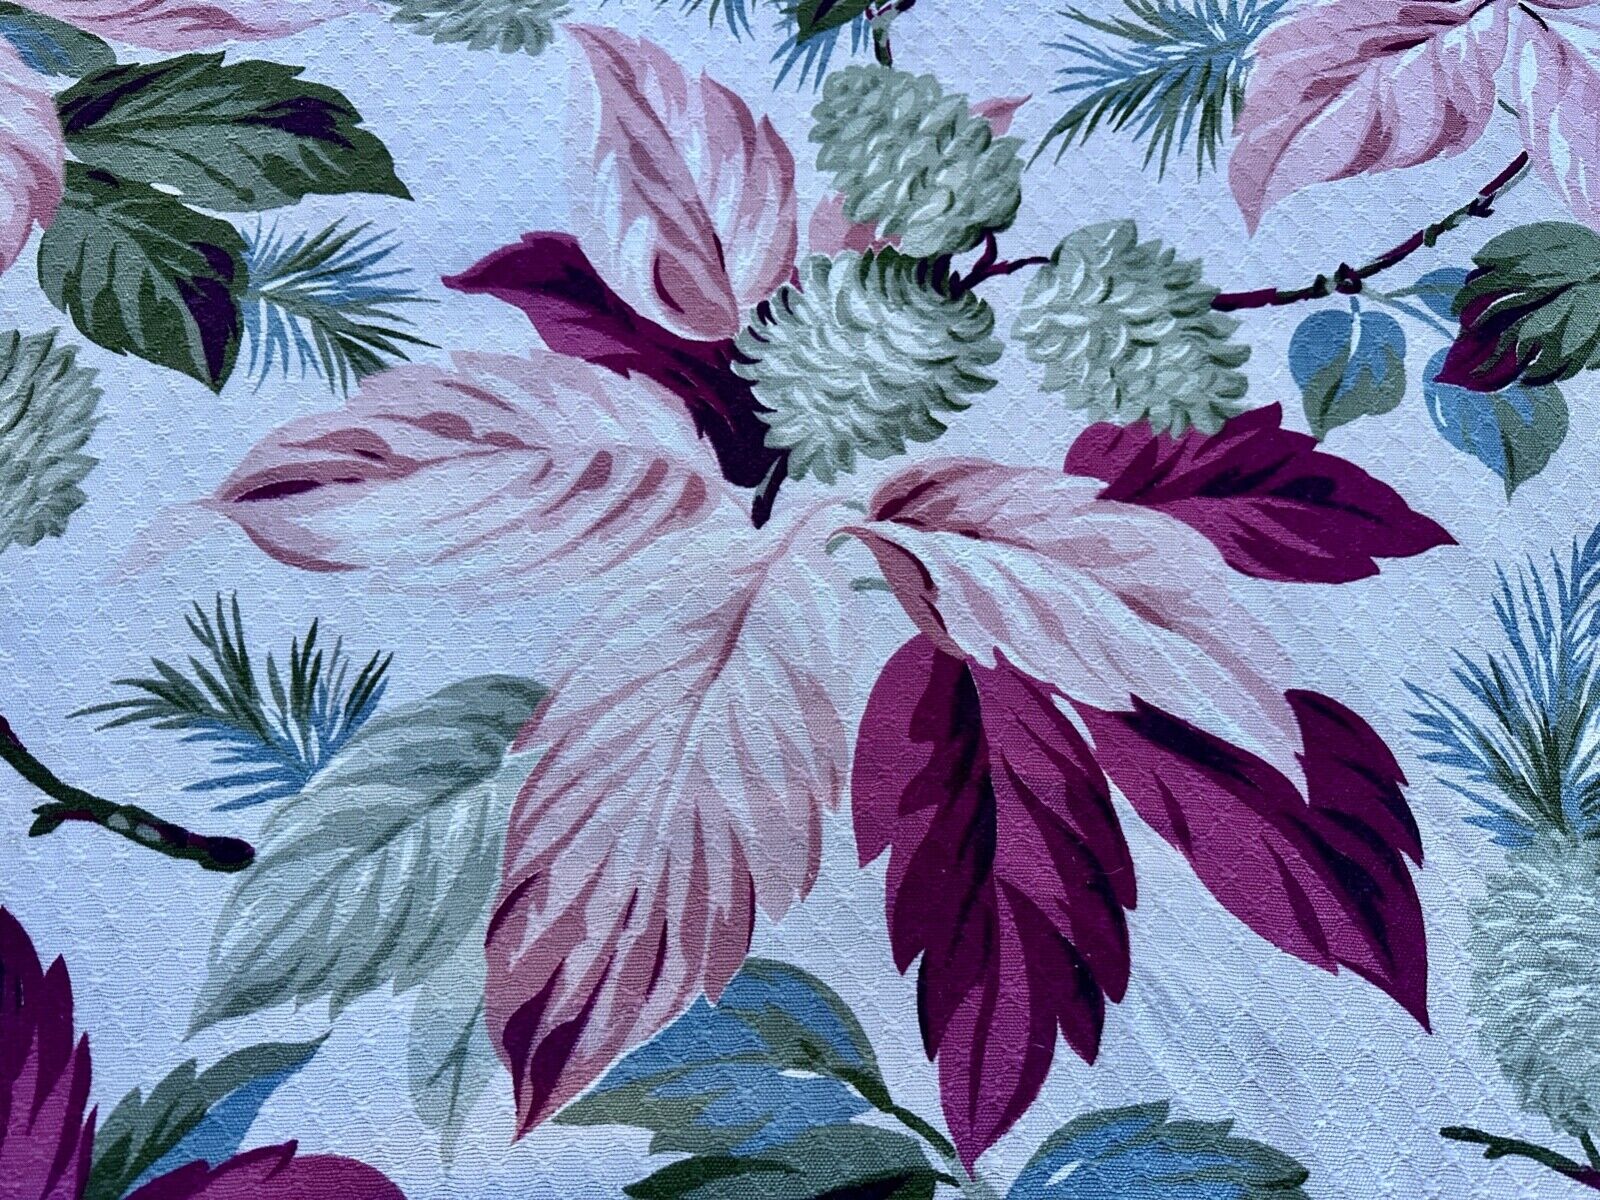 Dreamy 30's LUXE Leafy Hollywood Regency Pinecones GLAM Barkcloth Vintage Fabric